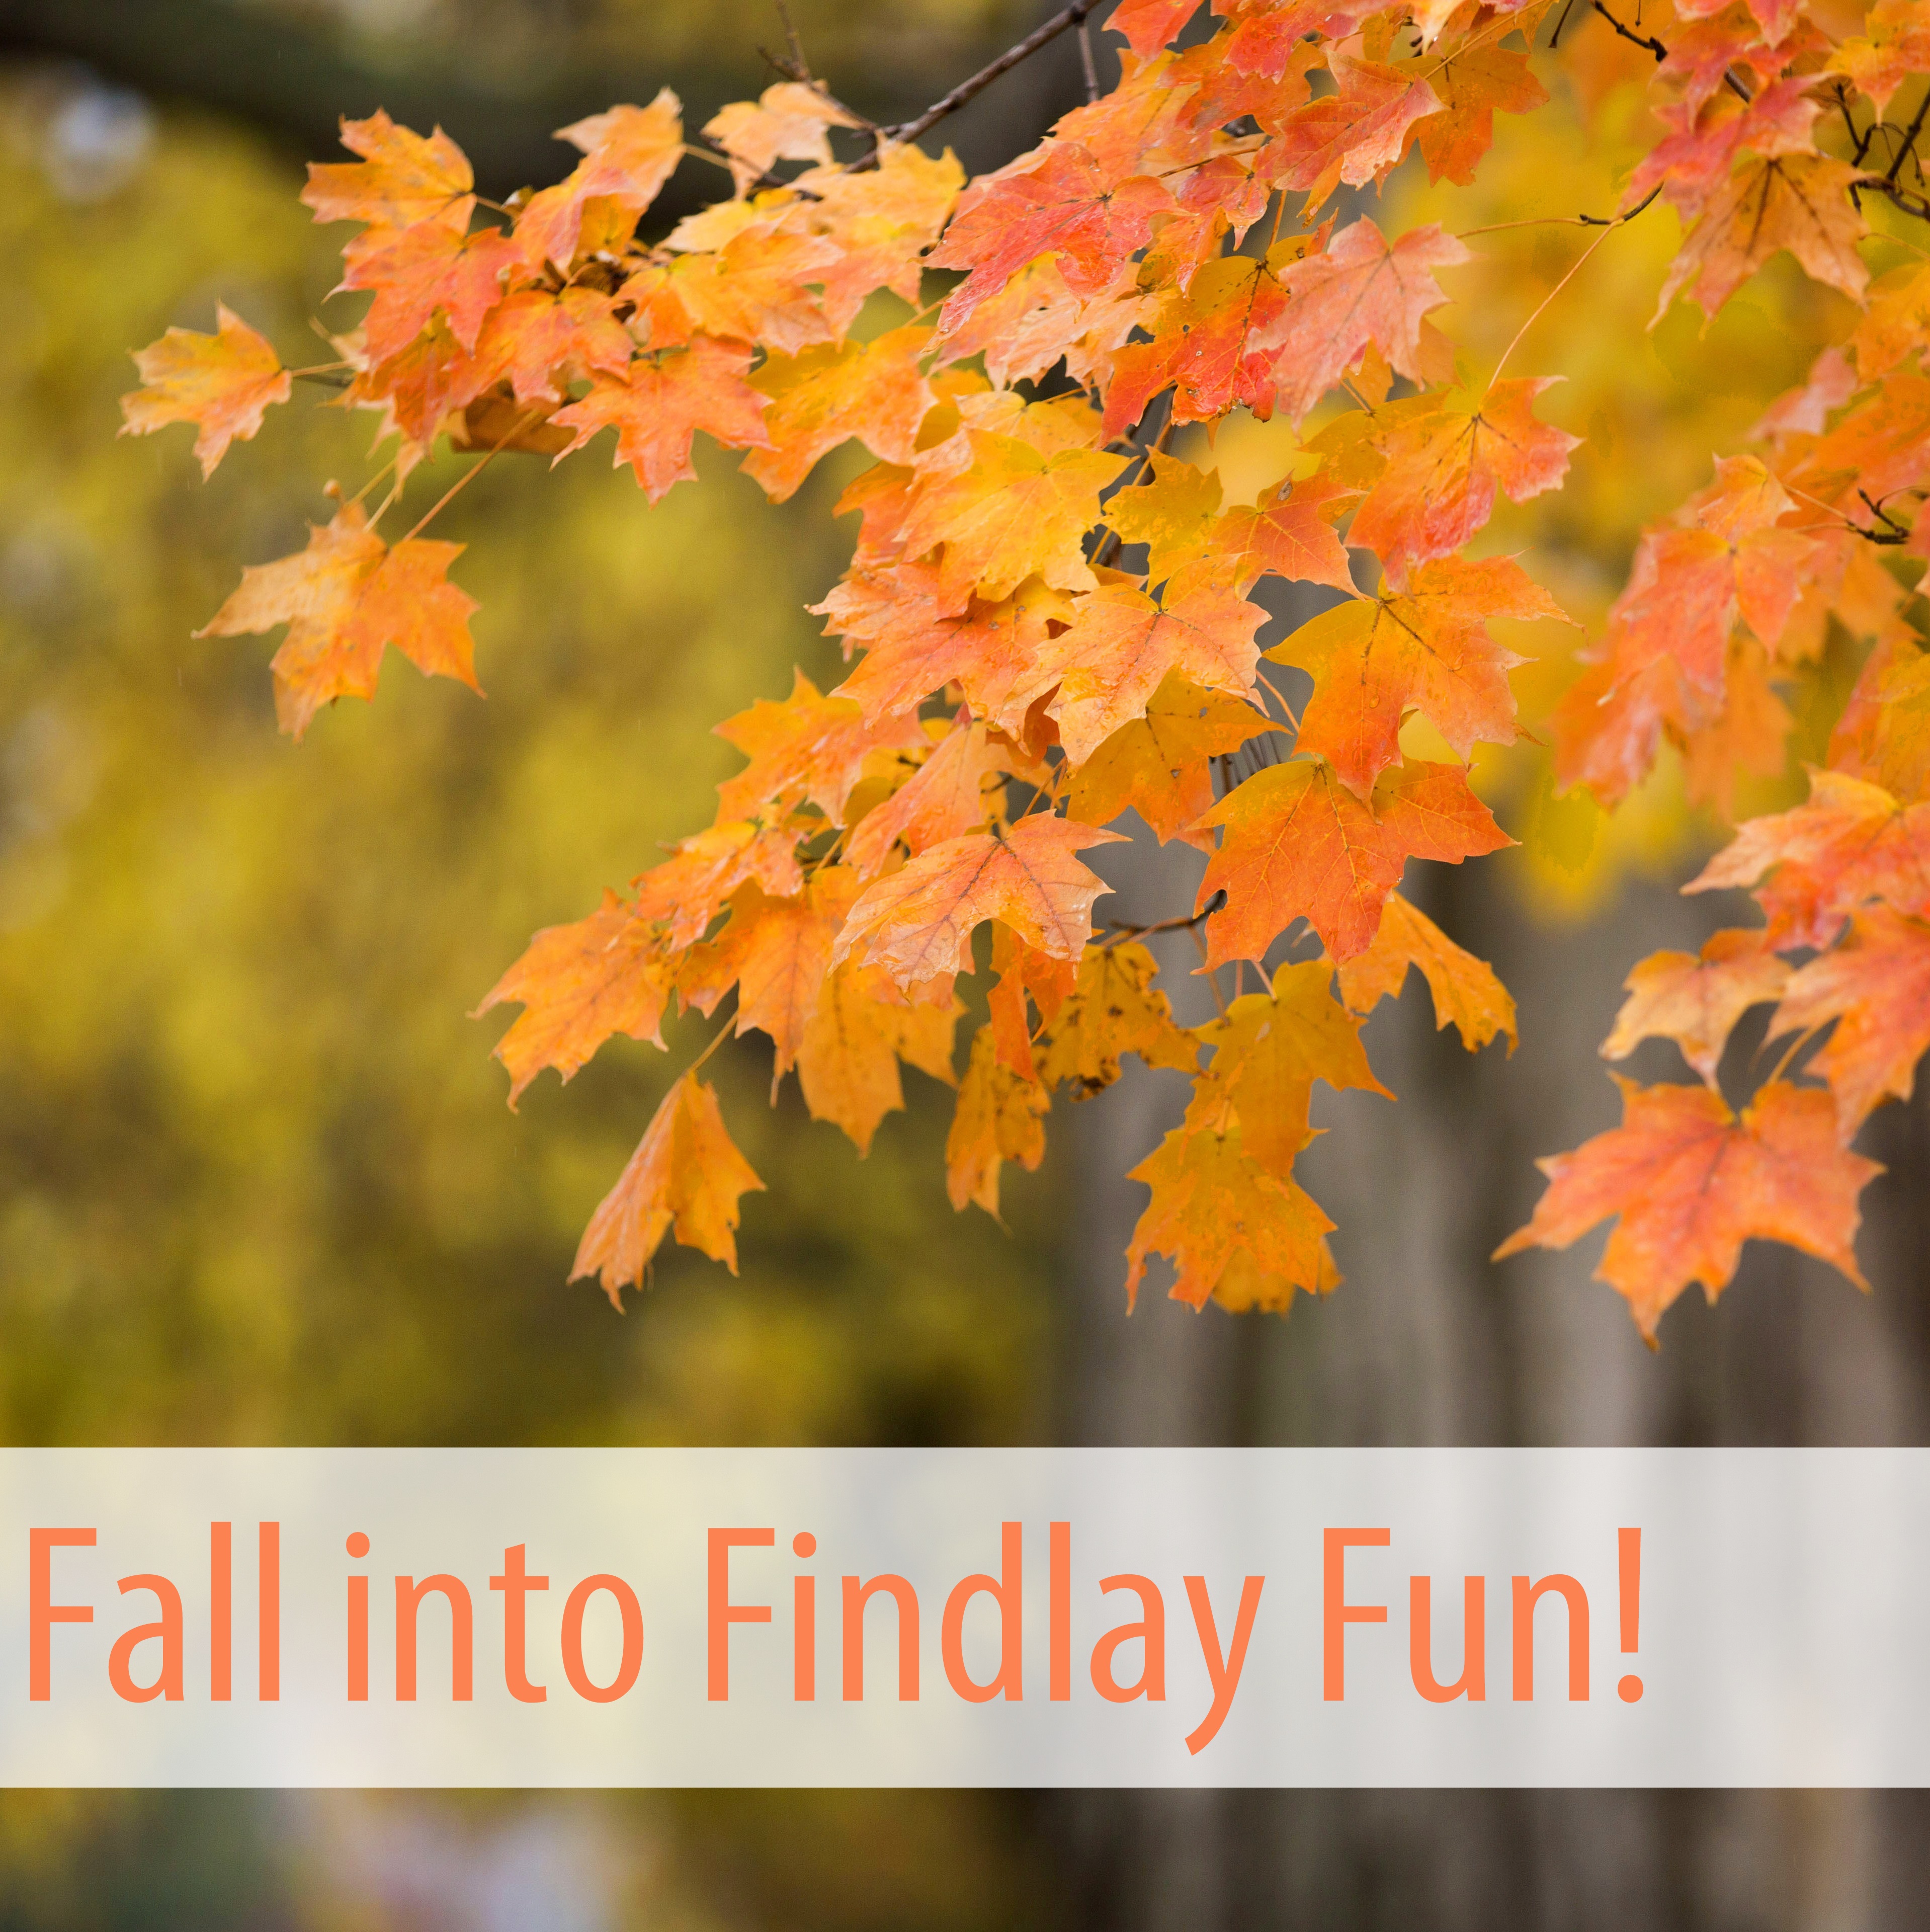 Take advantage of all the fun awaiting your family in Findlay this Fall! • VisitFindlay.com